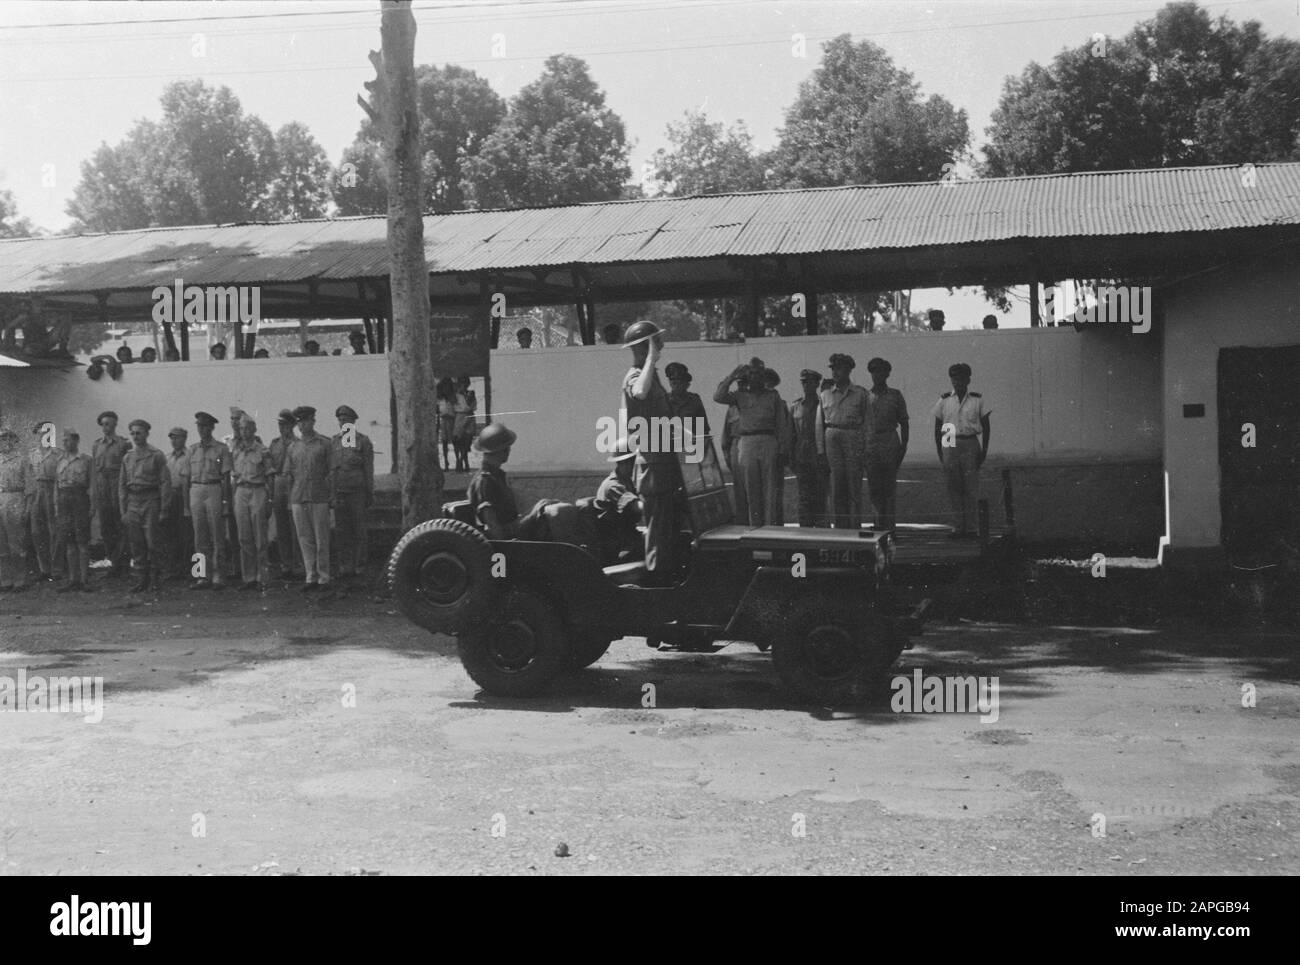 Inspection by General S. de Waal (commander B-division) Description: Collection Photo Collection Service for Army Contacts Indonesia, photon number 199-3-1 Date: April 1947 Location: Indonesia, Dutch East Indies Stock Photo